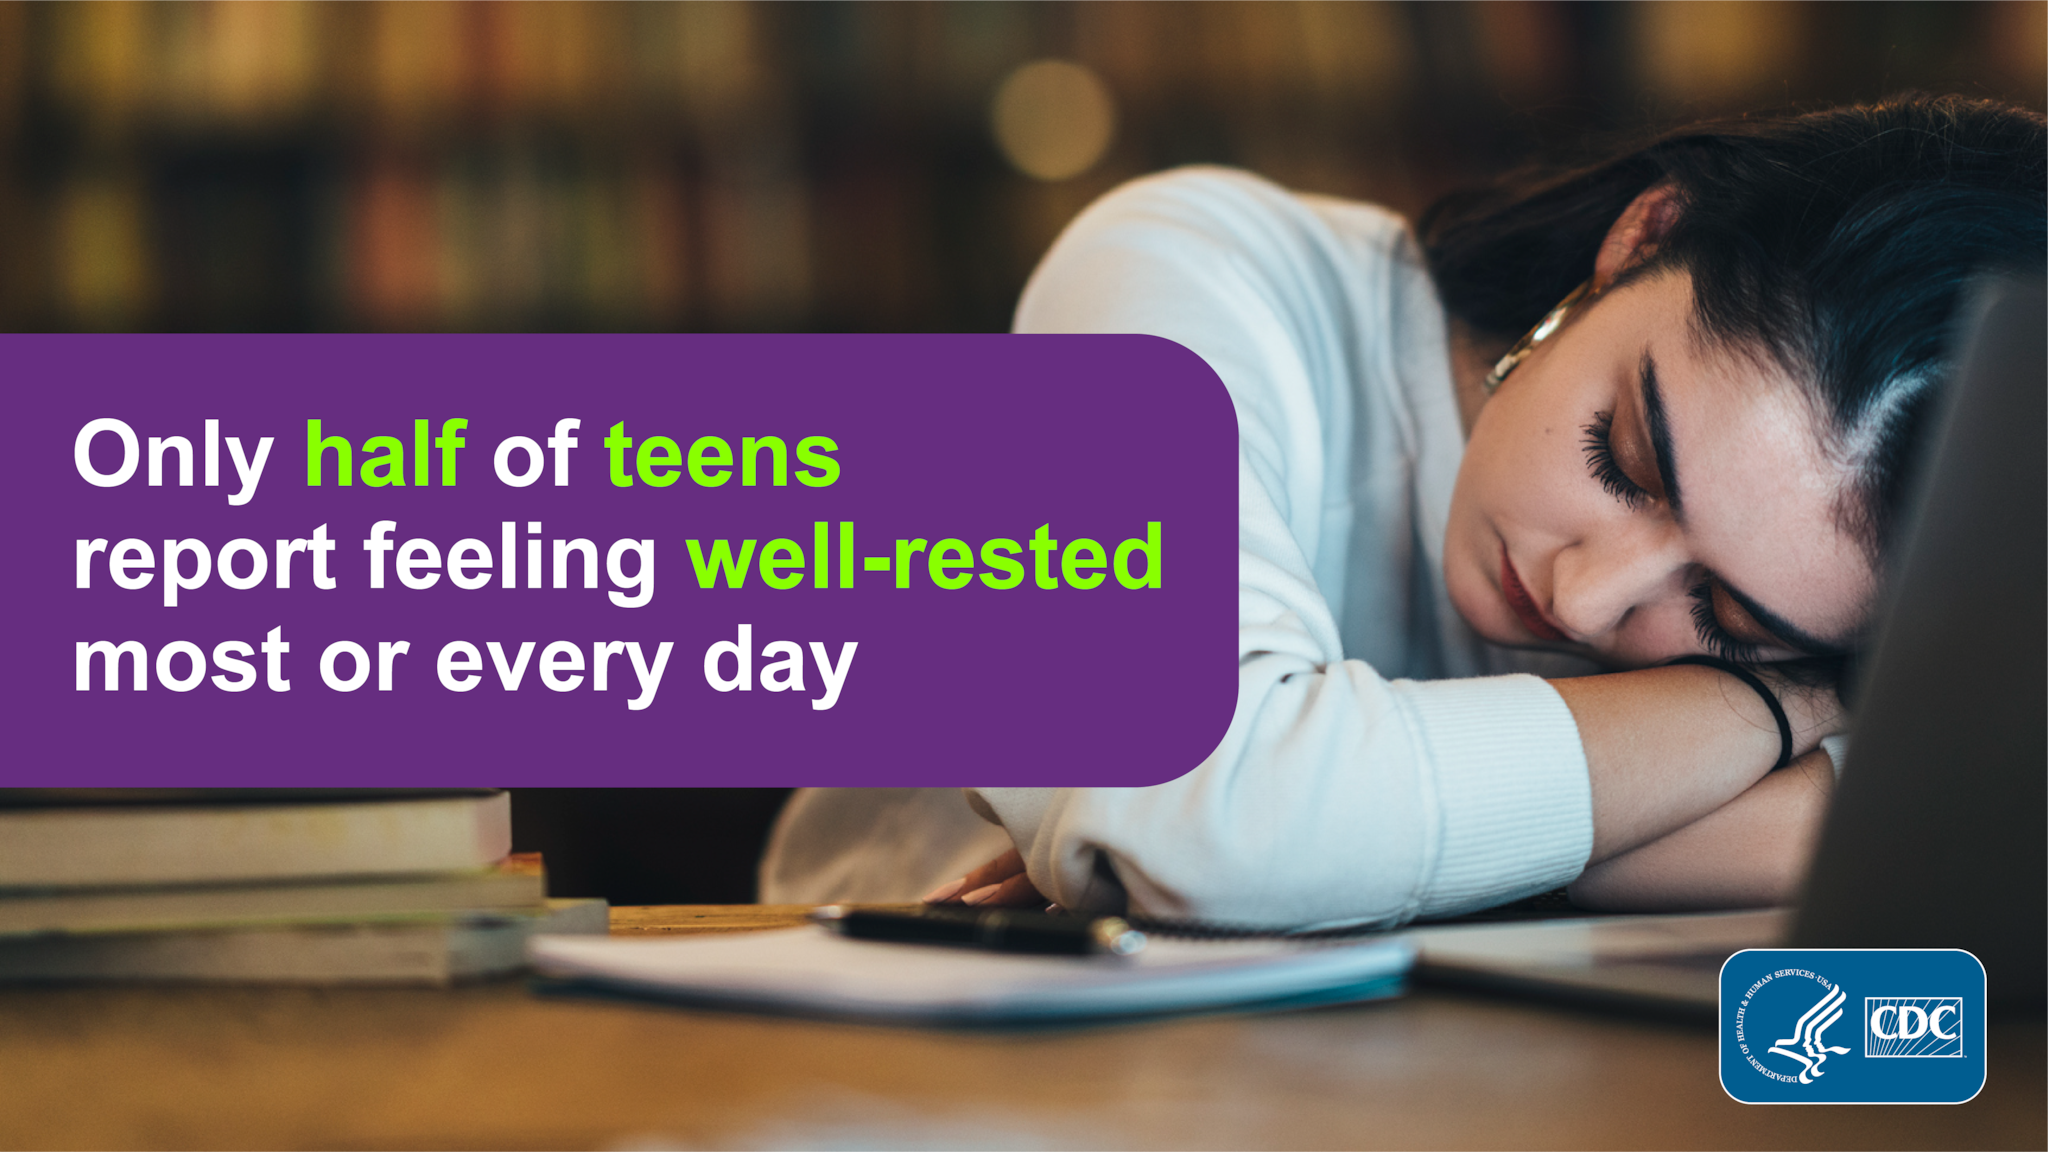 Photo of teenaged girl napping with text: only half of teens report feeling well-rested most or every day.